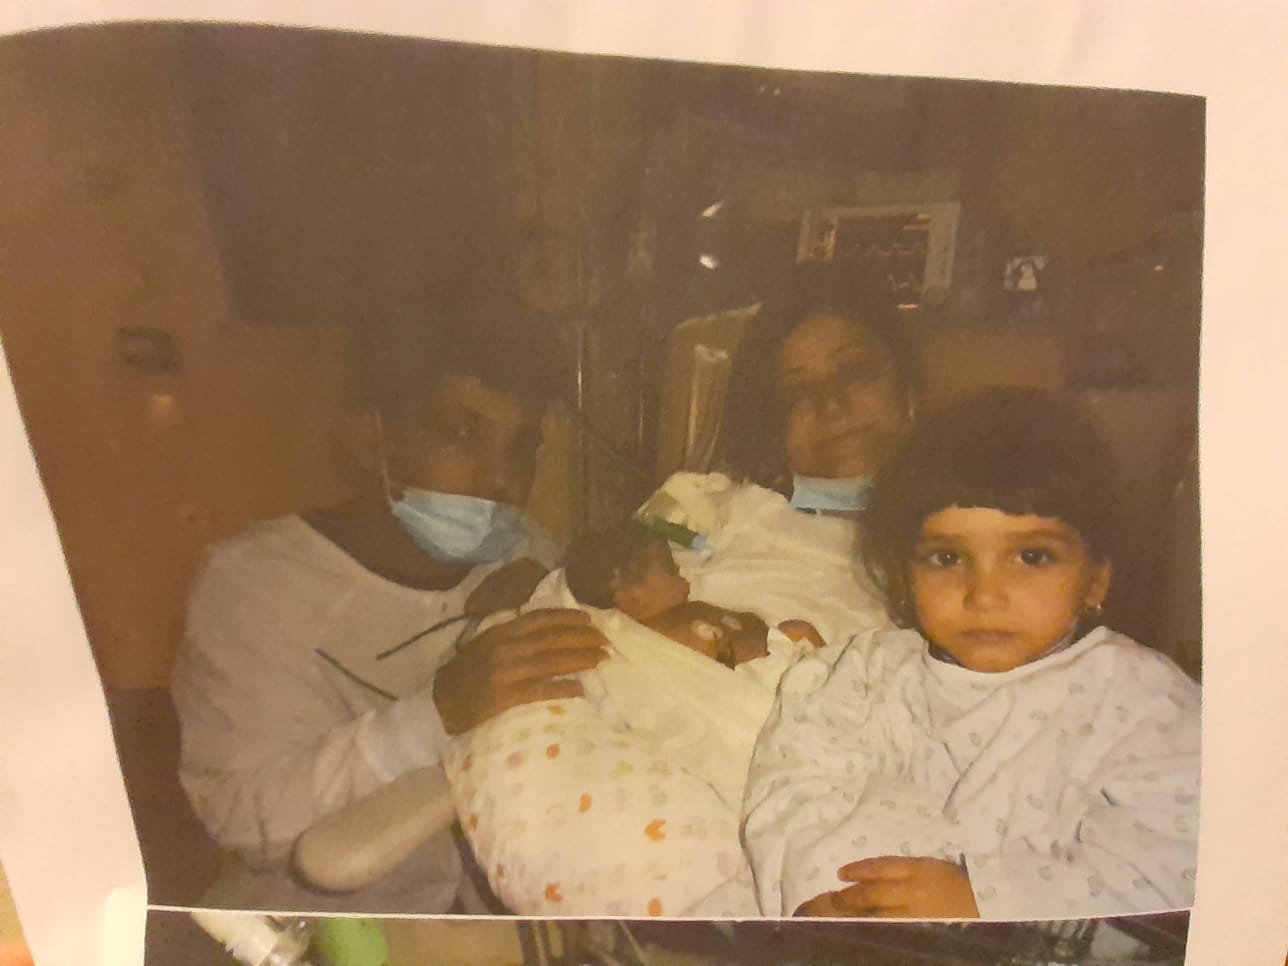 Hajar and Rupak Sharif (left and middle) lost their third child, Aleksandra, after they were prevented from accessing urgent medical care by French police